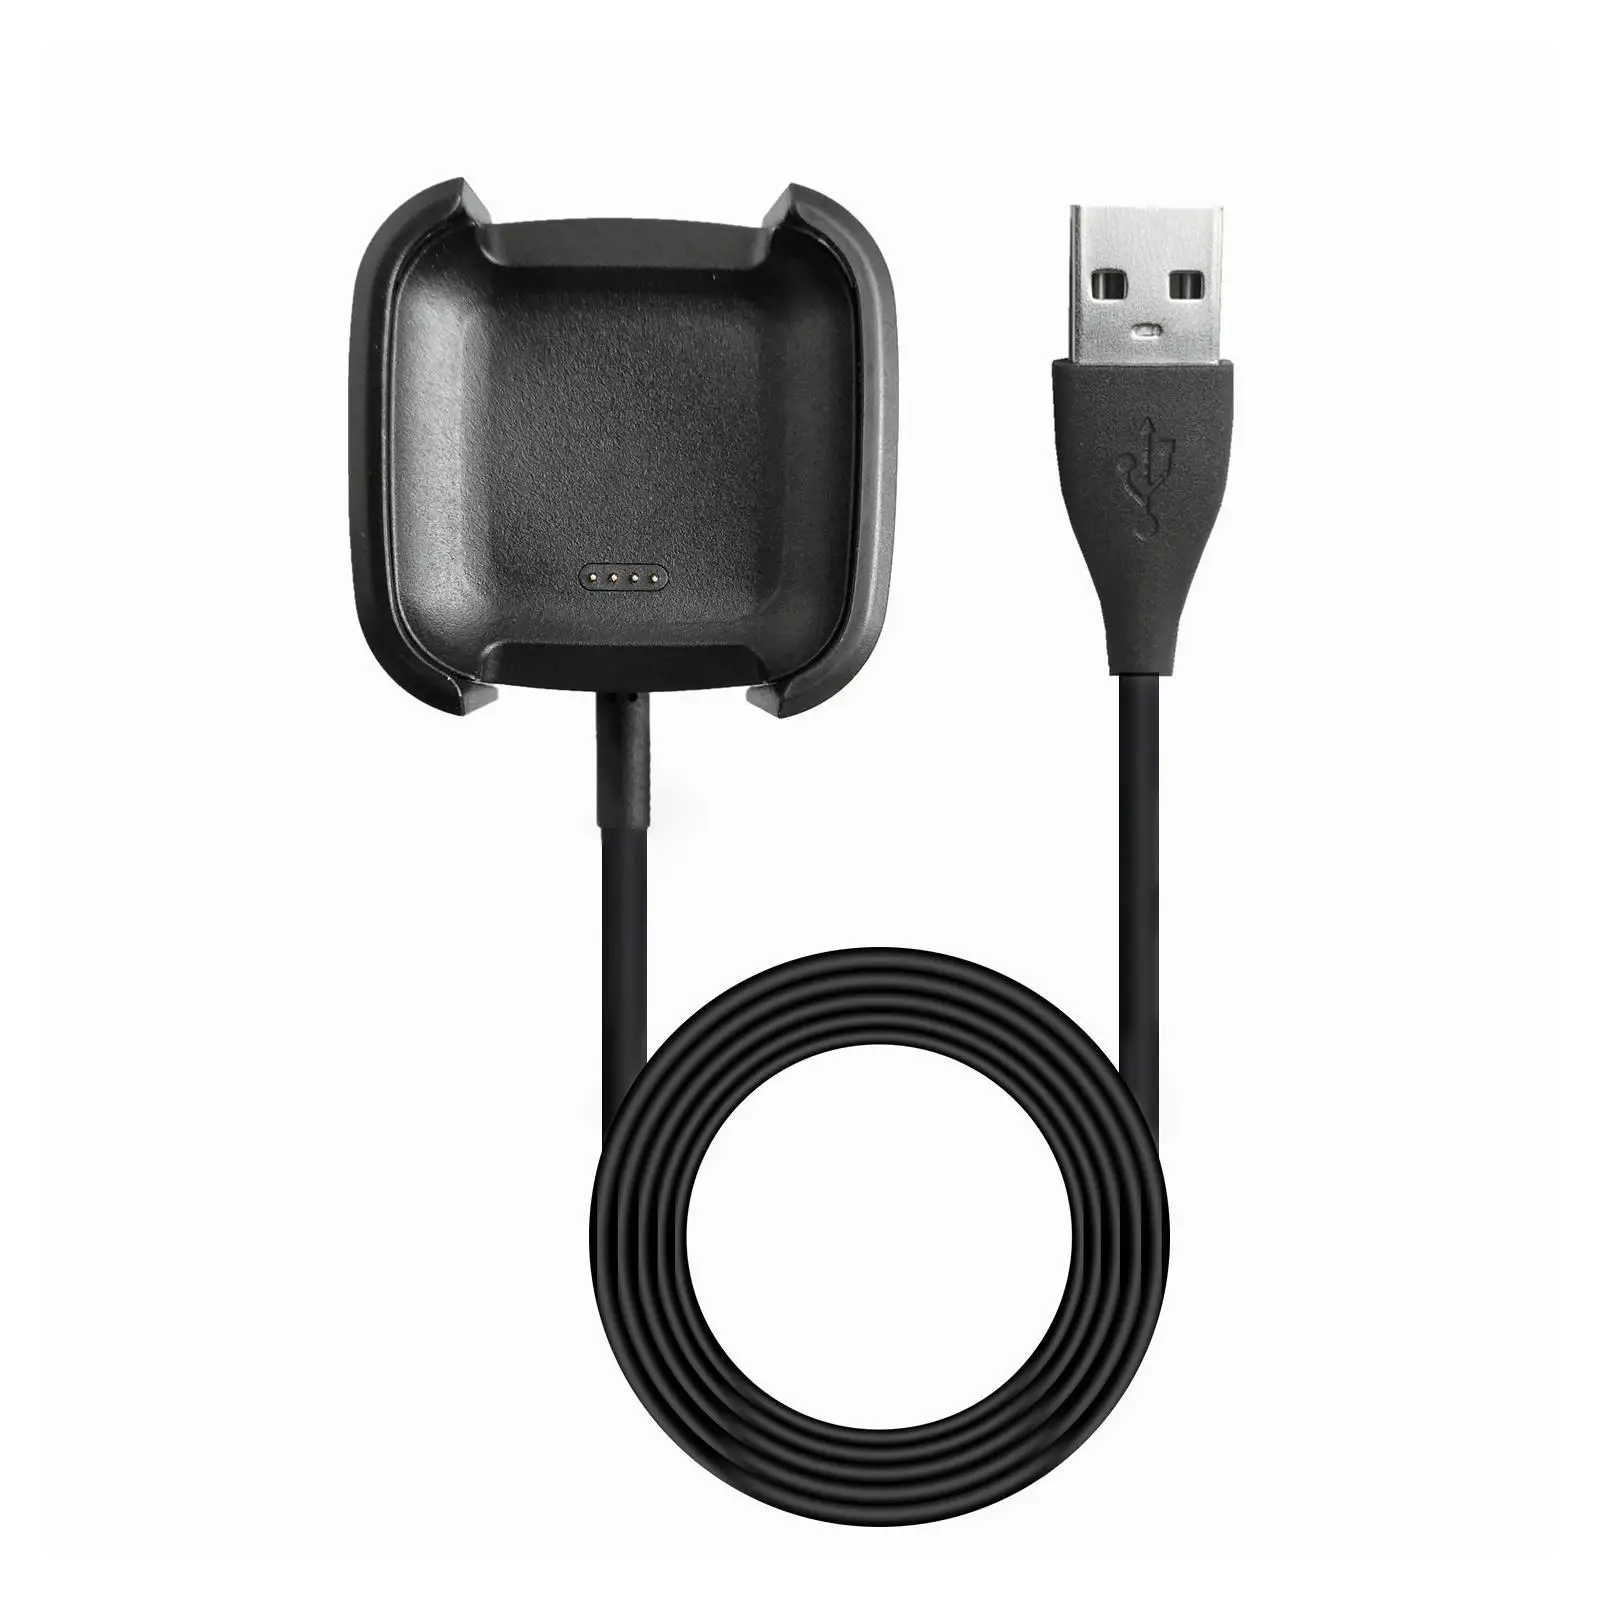 For Fitbit Versa 2 Charger Smart Watch USB Charging Cable Smart Bracelet Watch Fast Charging Stand Fitbit Charger Accessories